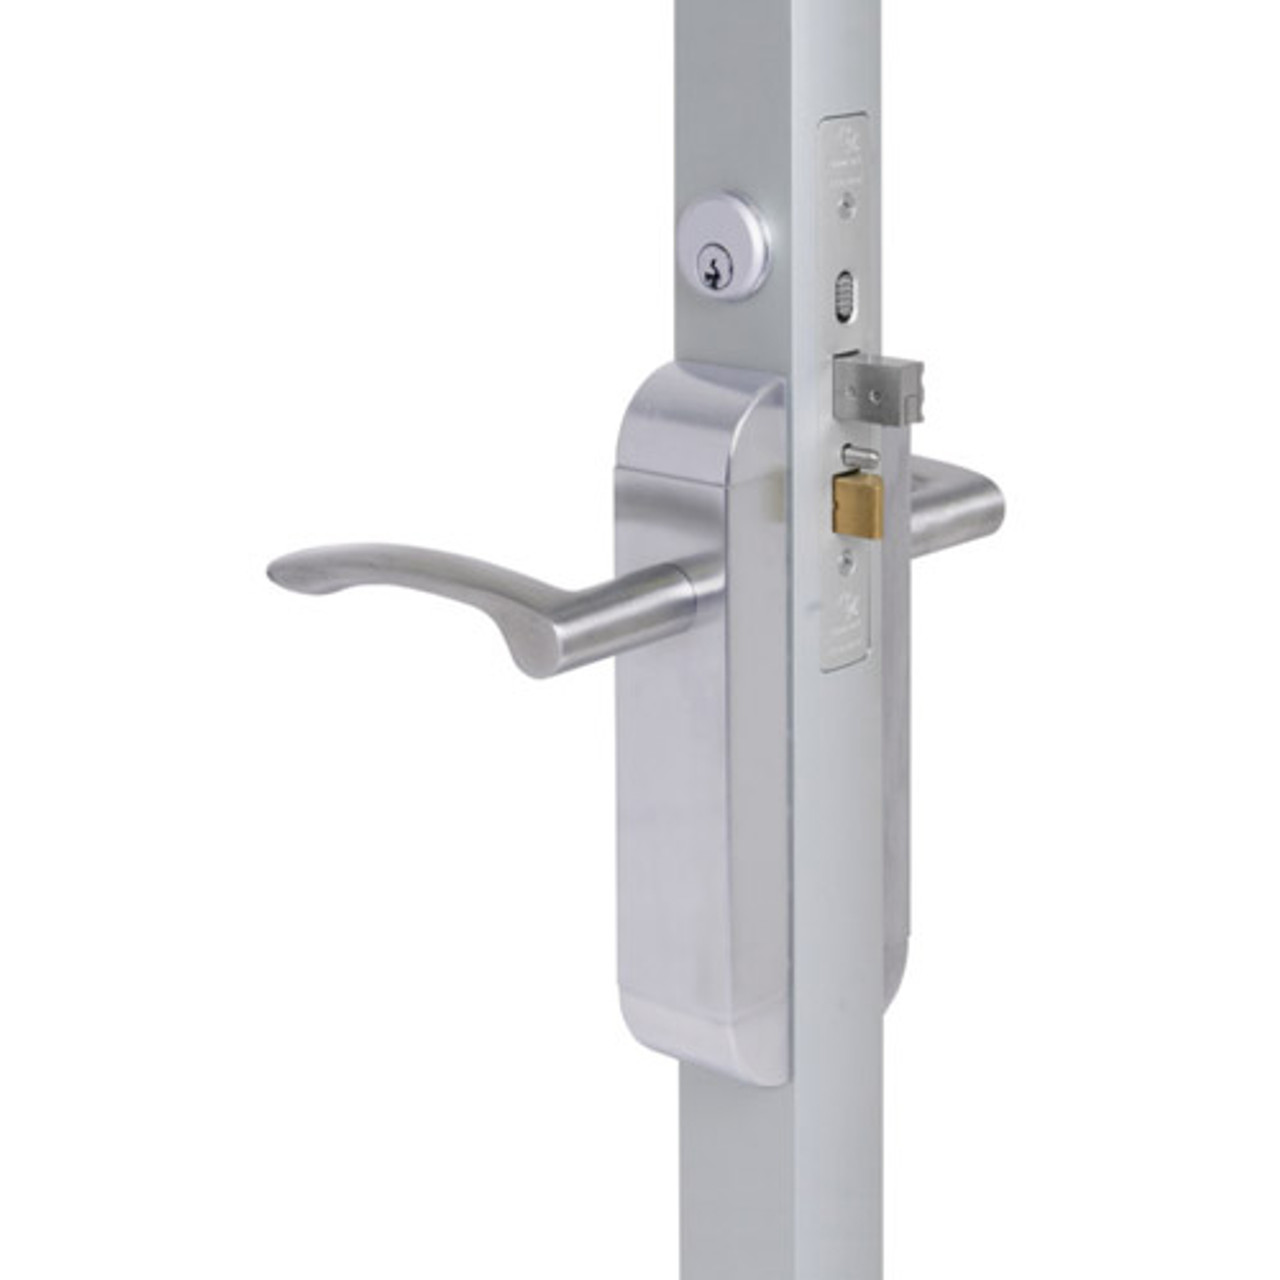 2190-341-303-32 Adams Rite Dual Force Interconnected 2190 series Deadlock/Deadlatch in Bright Stainless